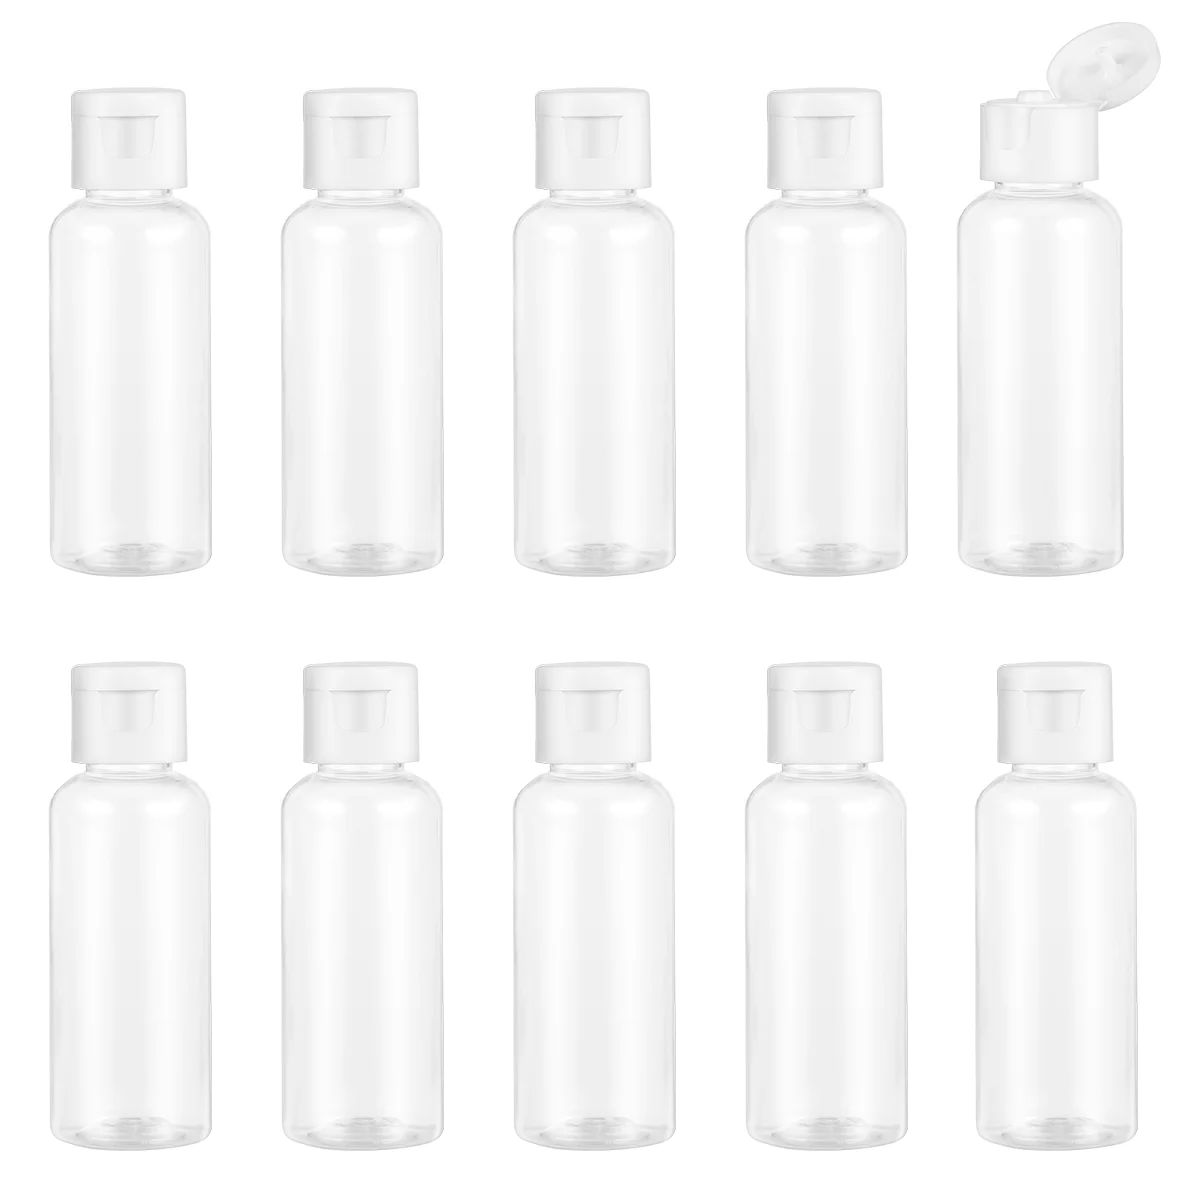 Plastic Travel Flask Refillable Travel Bottle Liquid Cosmetics Containers Shampoo Cream For Travel vacuum flask led temperature display smart thermo water bottle for wholesale 304 stainless steel 450ml capacity